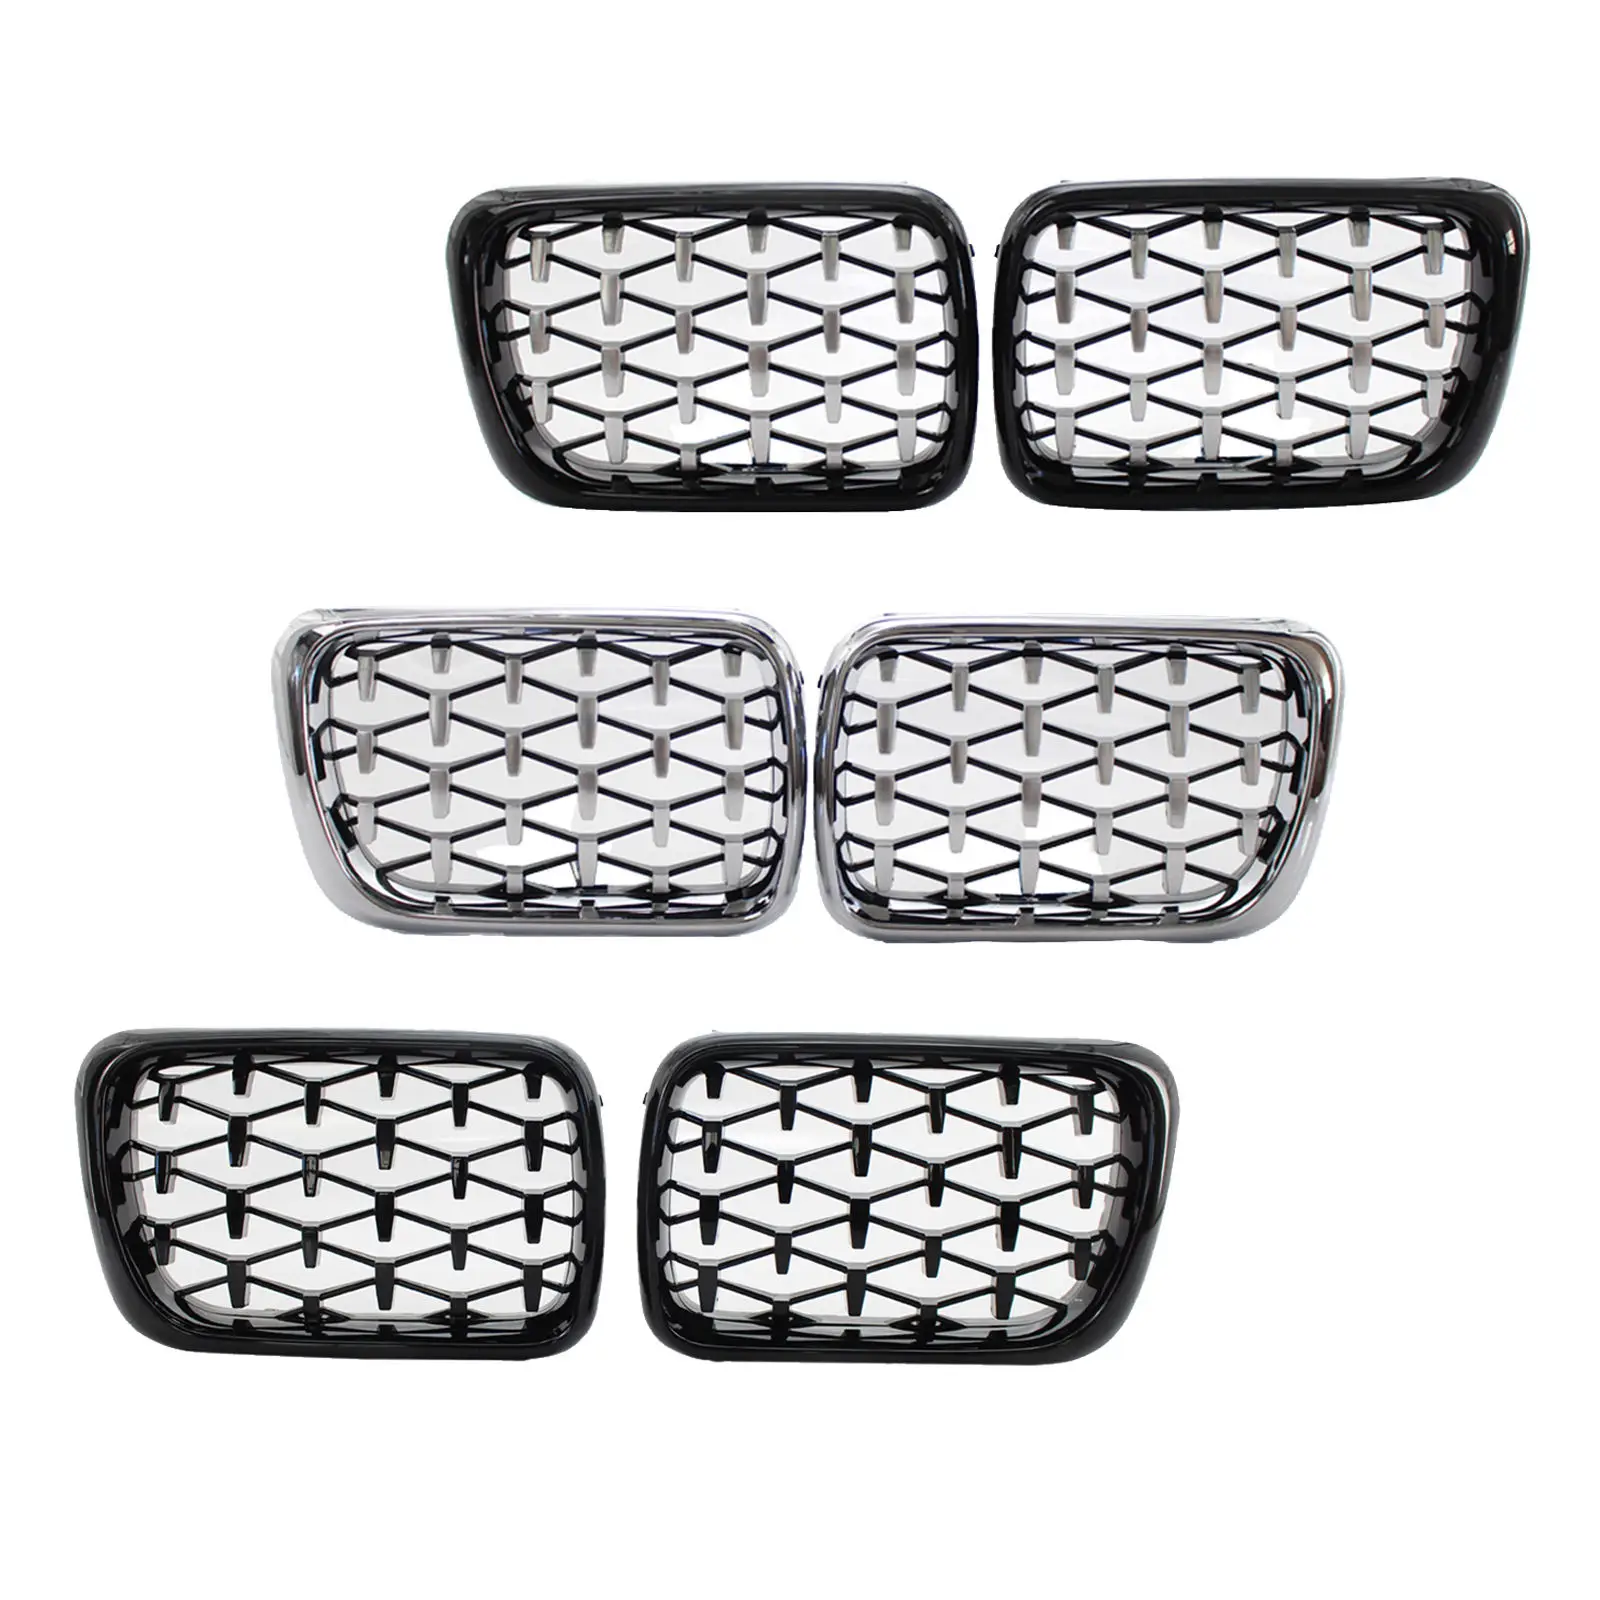 1Pair Auto Car Front Bumper Kidney Grill for  E36 3 Series 1997-1999, Complete kit, comes as a pair.